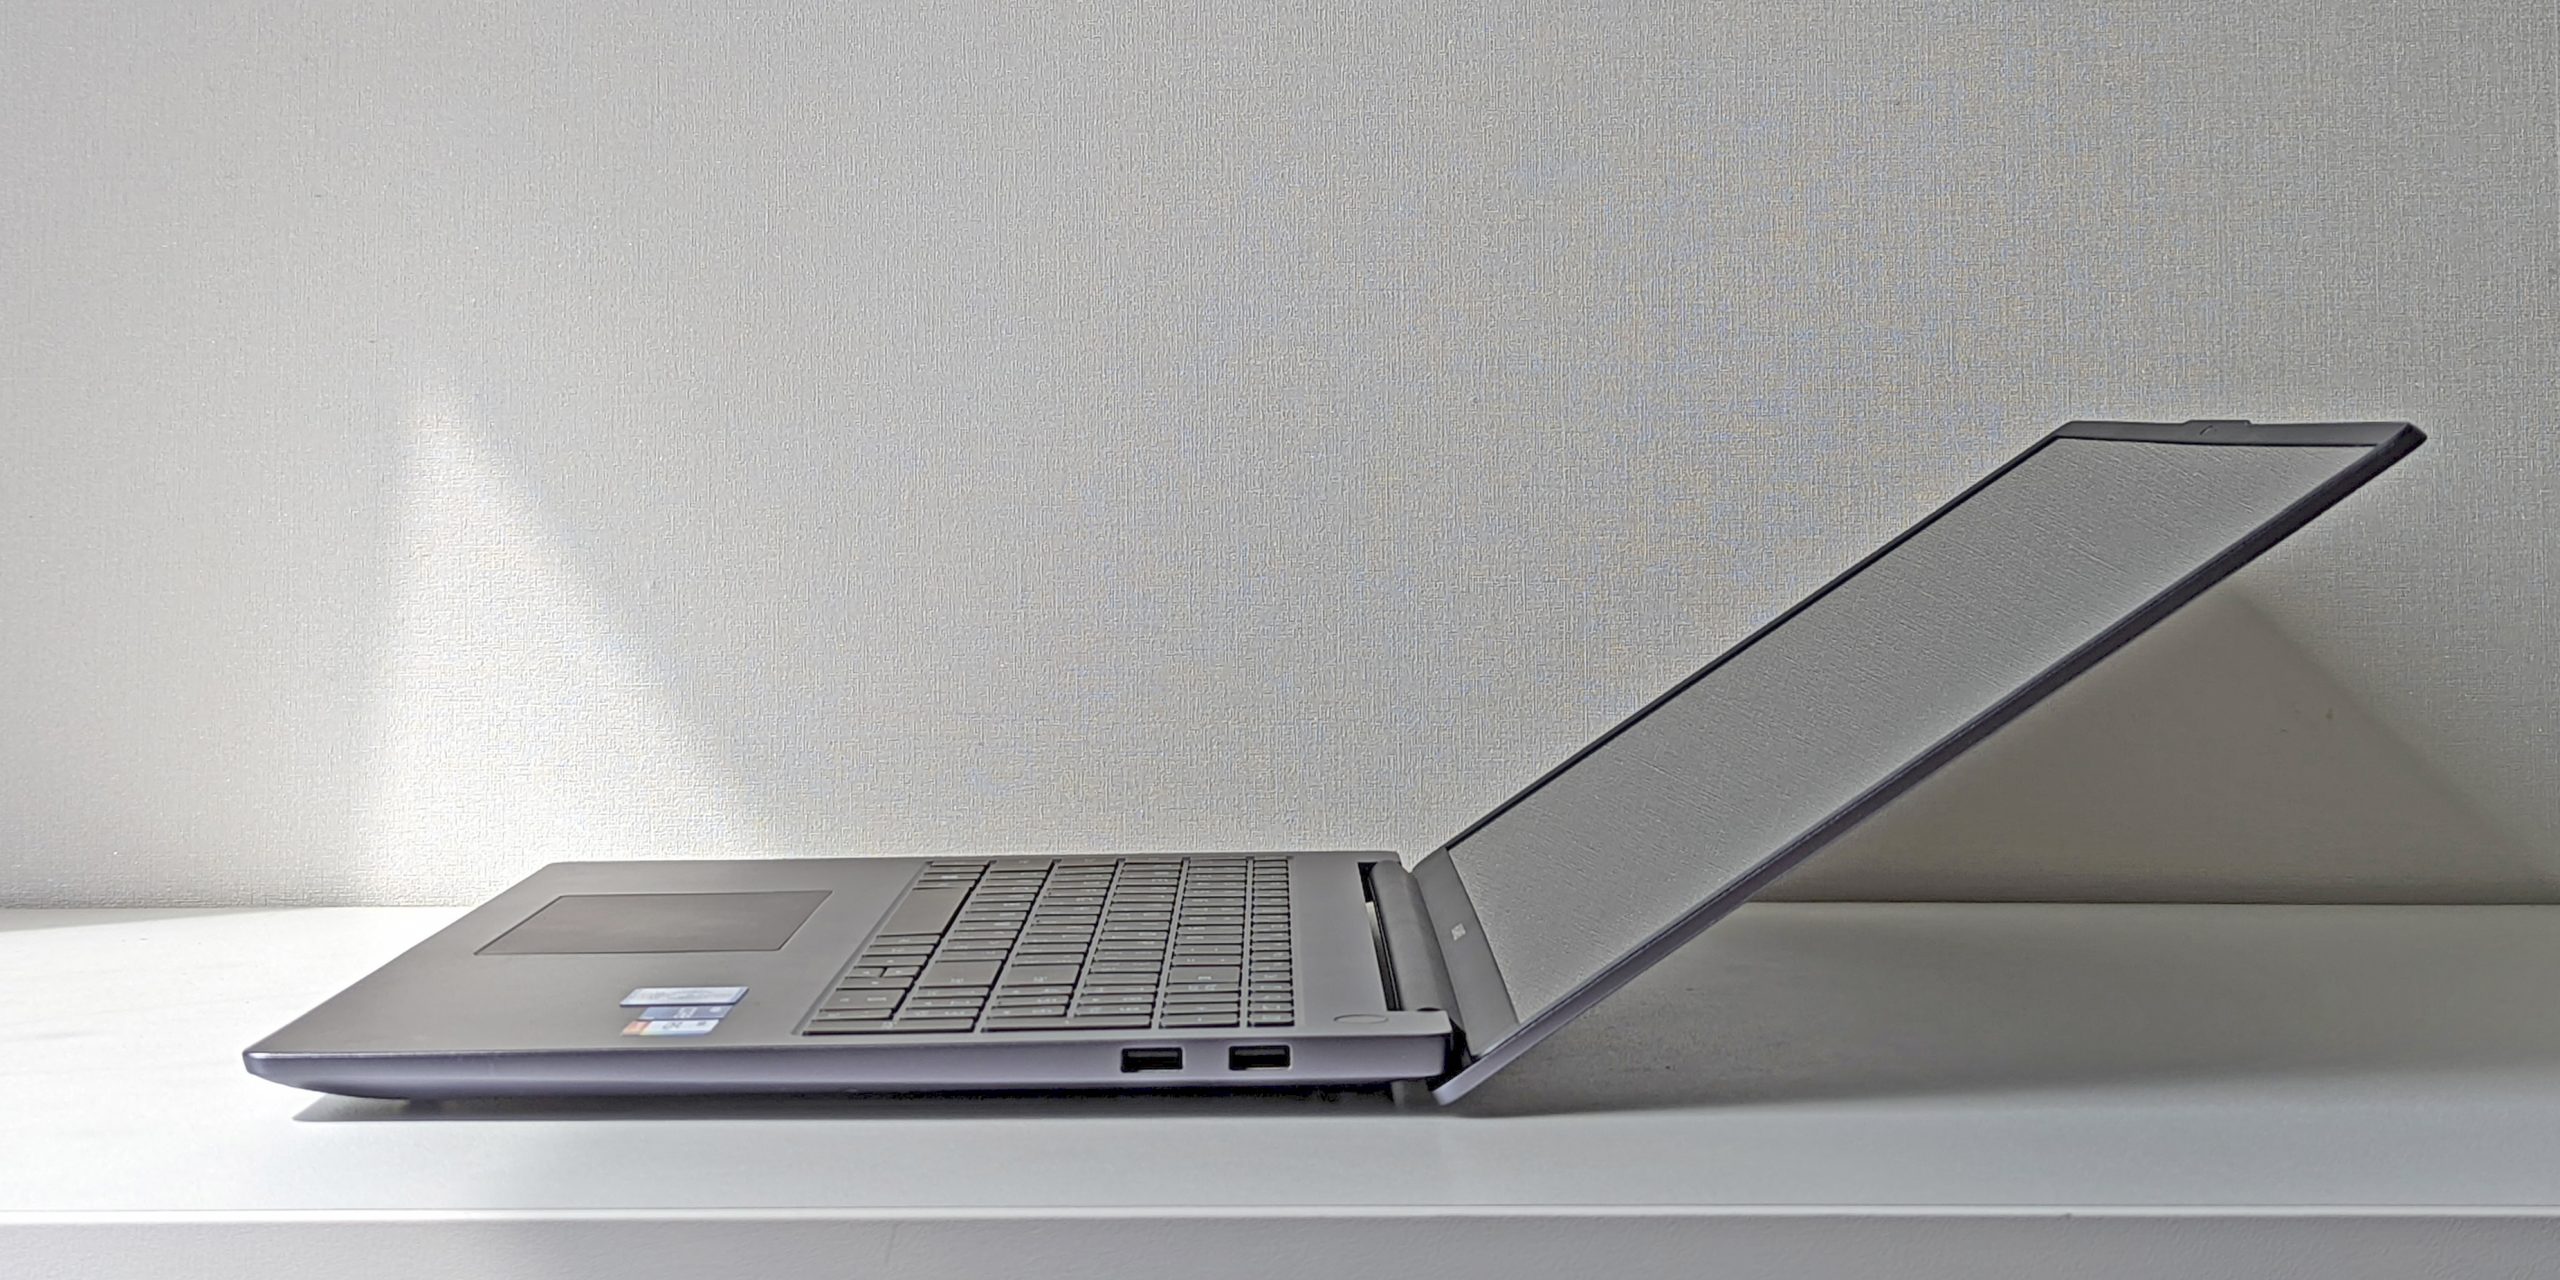 The maximum opening angle of the Huawei MateBook D16 cover is about 155 degrees